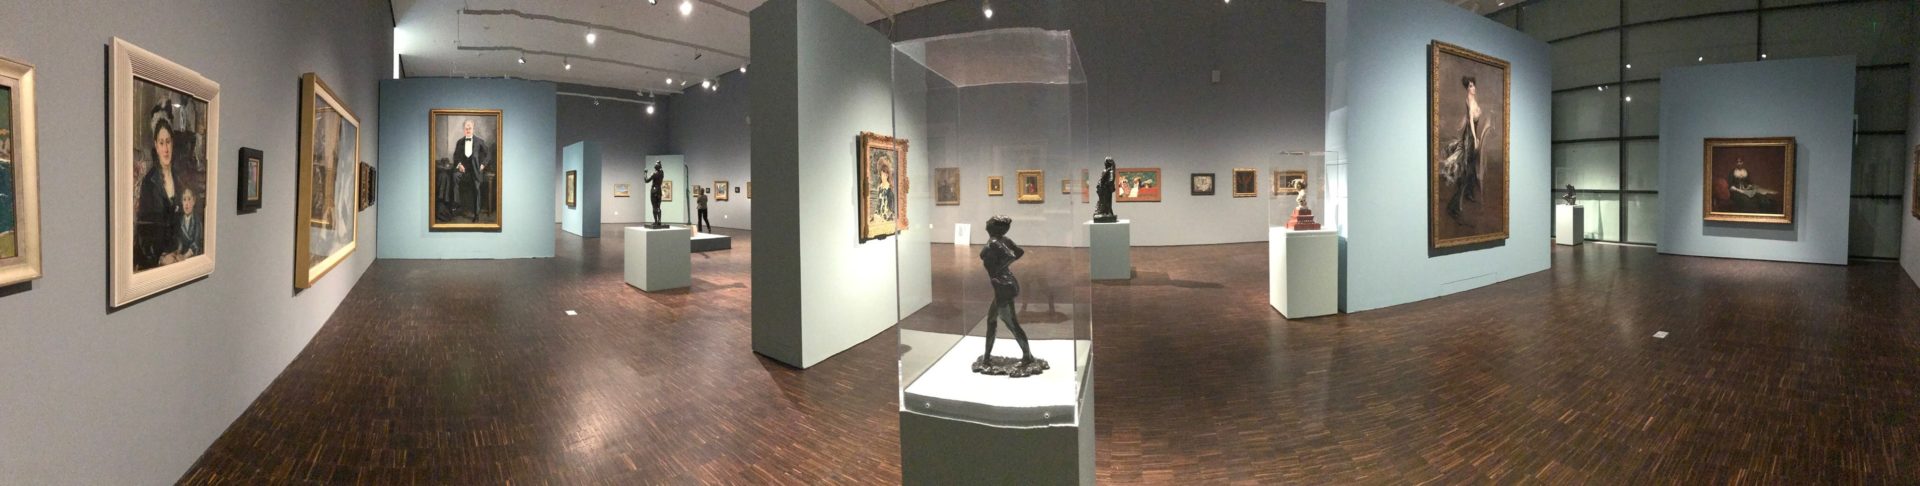 Figge French Modern Exhibit